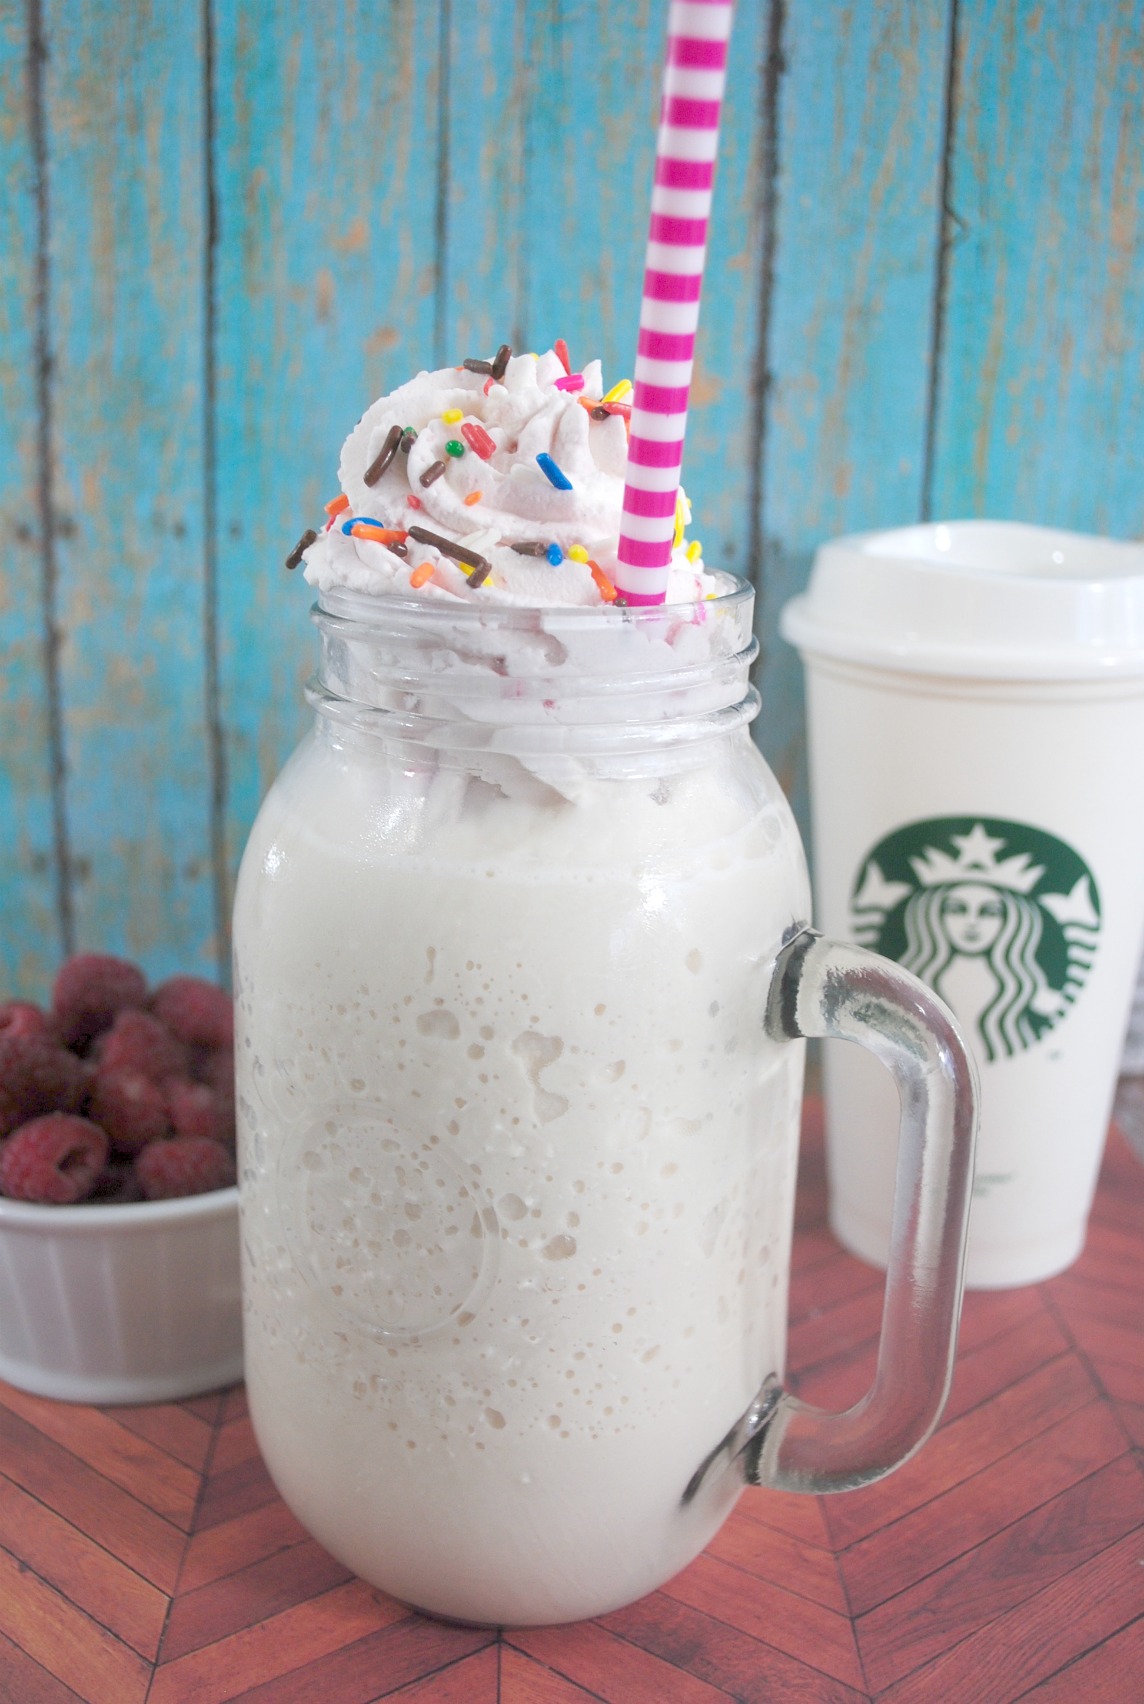 copycat Starbucks birthday cake frappuccino in a glass topped with whipped cream and sprinkles with a striped paper straw.